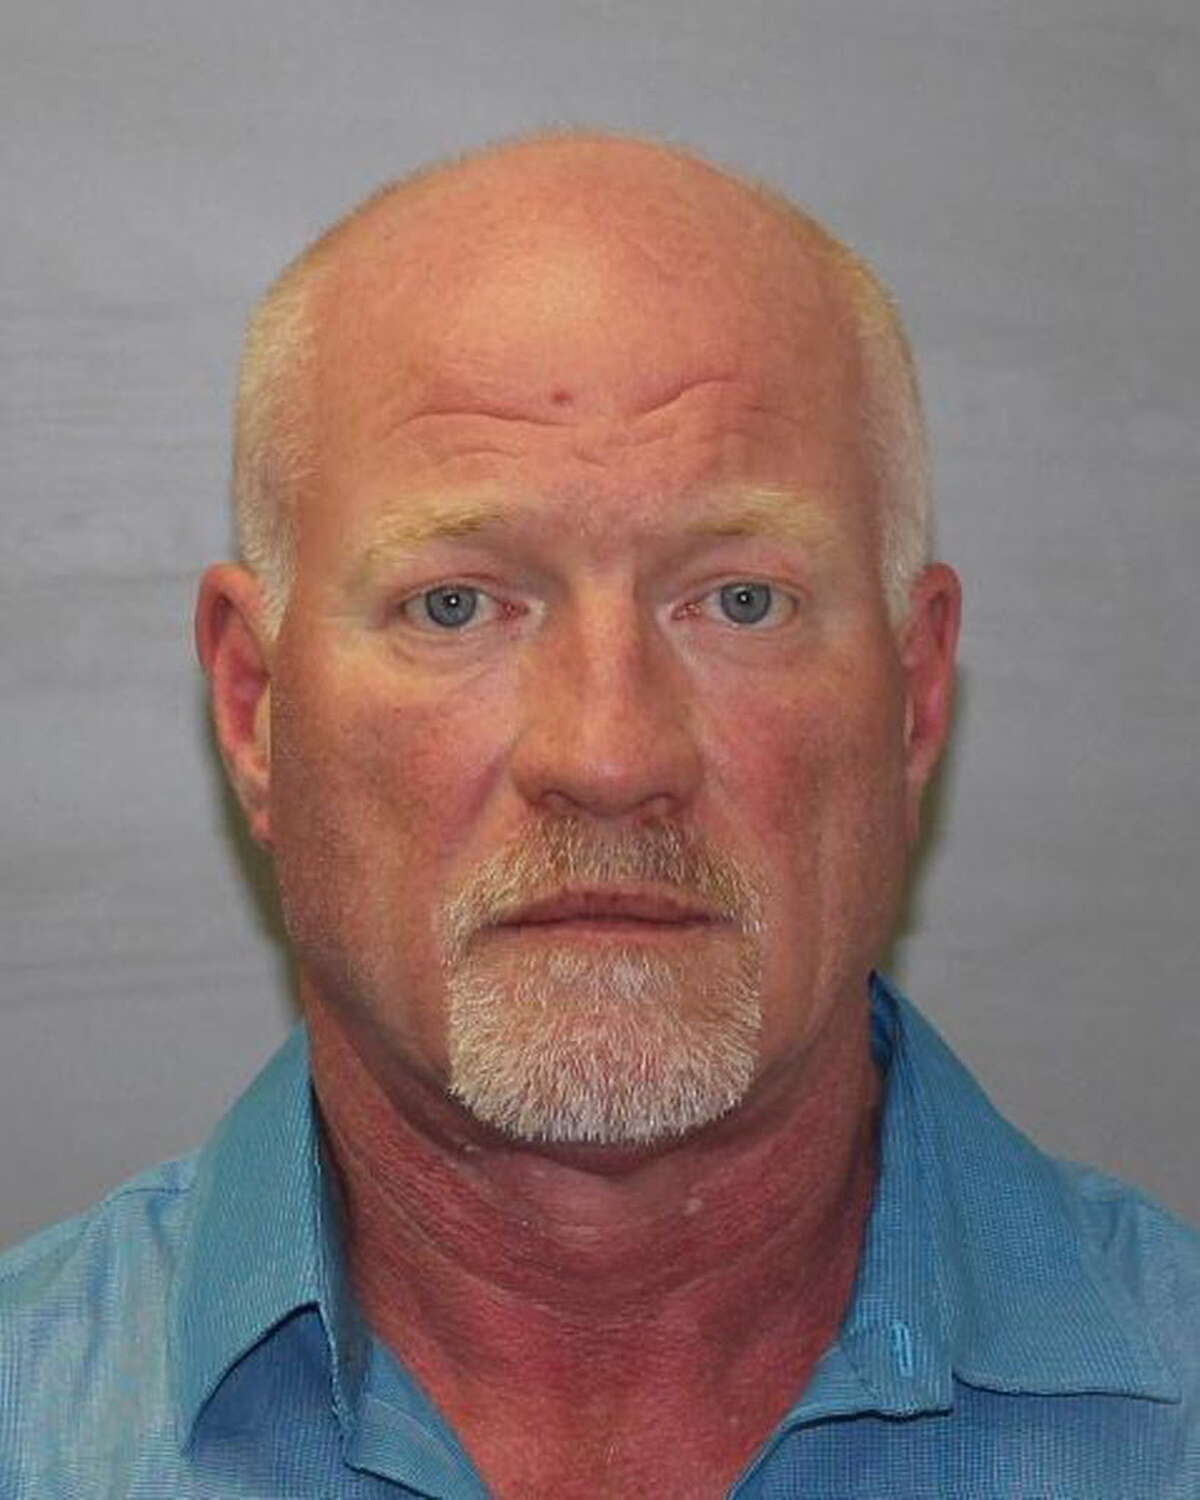 Gene E. Palmer, 57, of Dannemora is charged with felony counts of promotion of prison contraband and evidence tampering. Arraigned on the charges Wednesday night, Palmer is due back in court on Thursday. He was arrested in connection with the escape of two prisoners, Richard Matt, 49, and David Sweat, 35. (State Police)